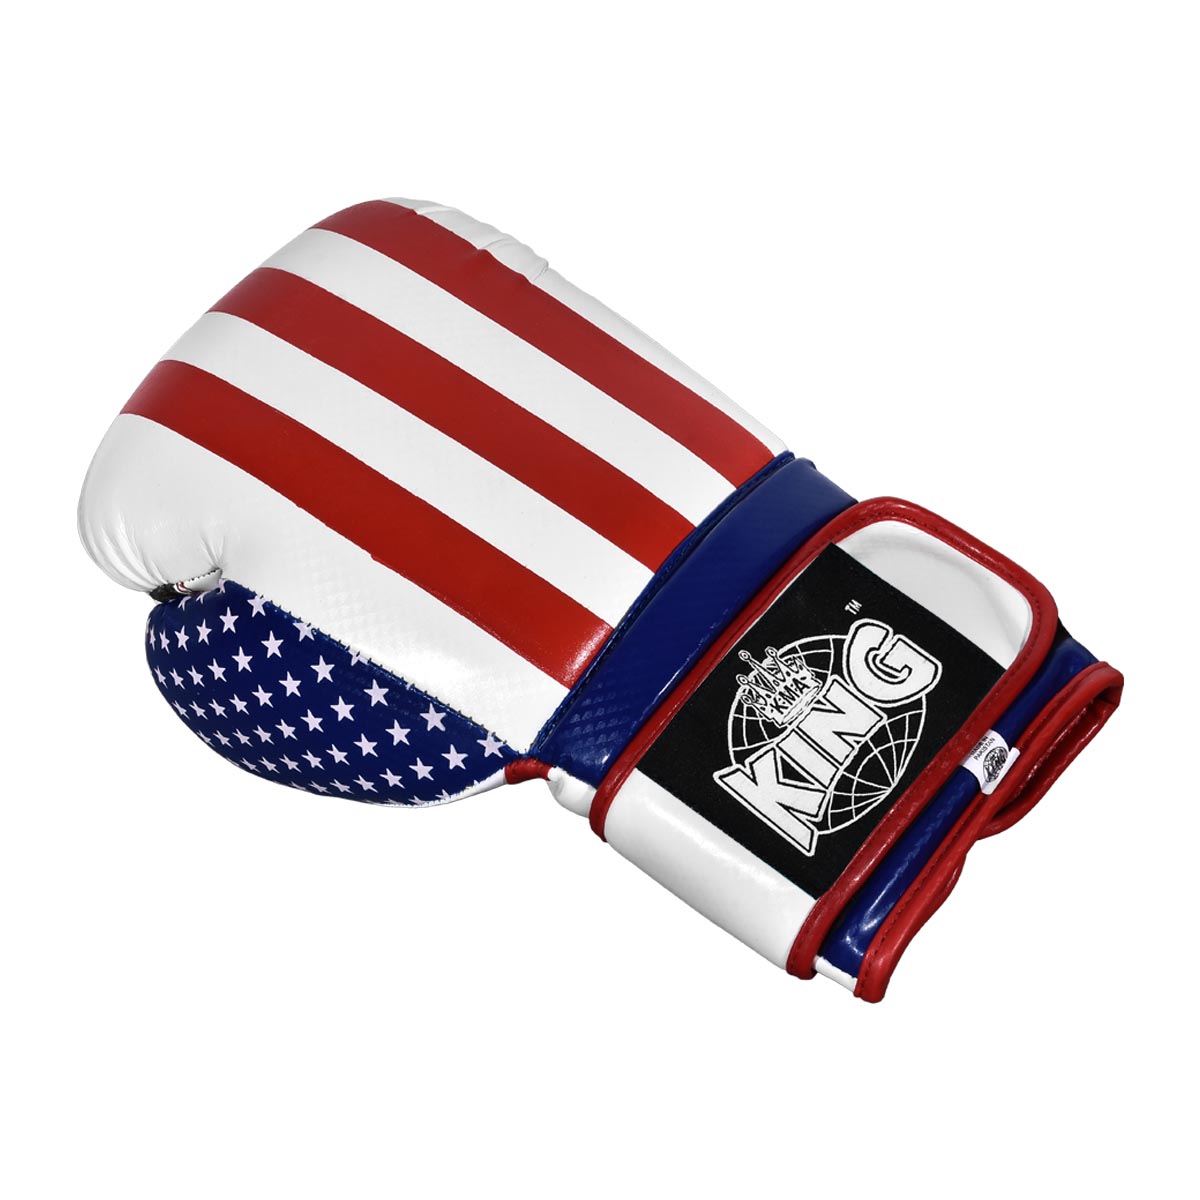 Kick Boxing Glove Canada Flag Red White PatternTra... Details about   BROOKLYN VERTICAL 16oz 